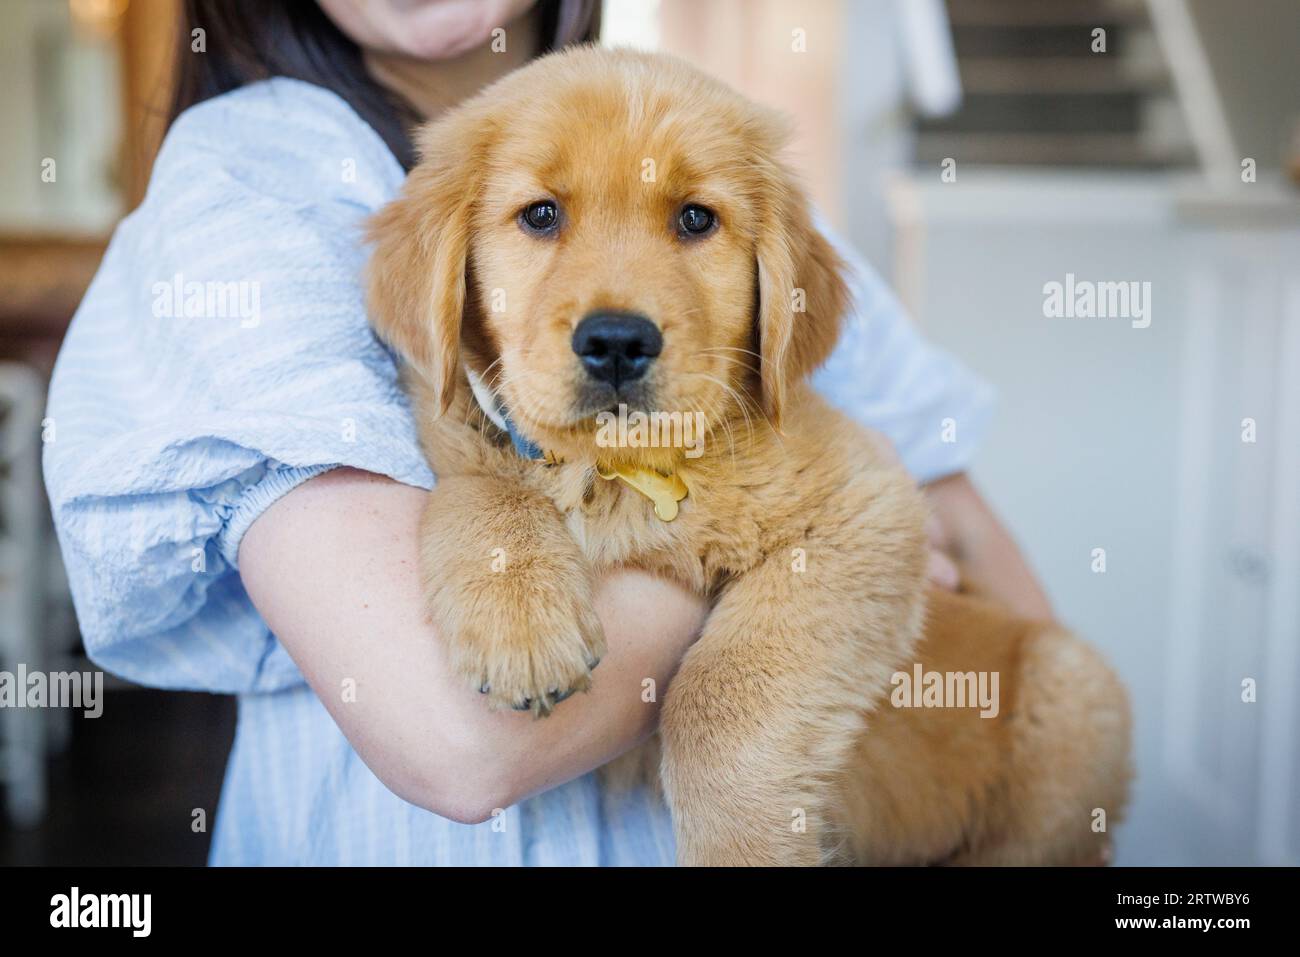 A millenial young adult woman holds a Golden Retriever puppy. Stock Photo